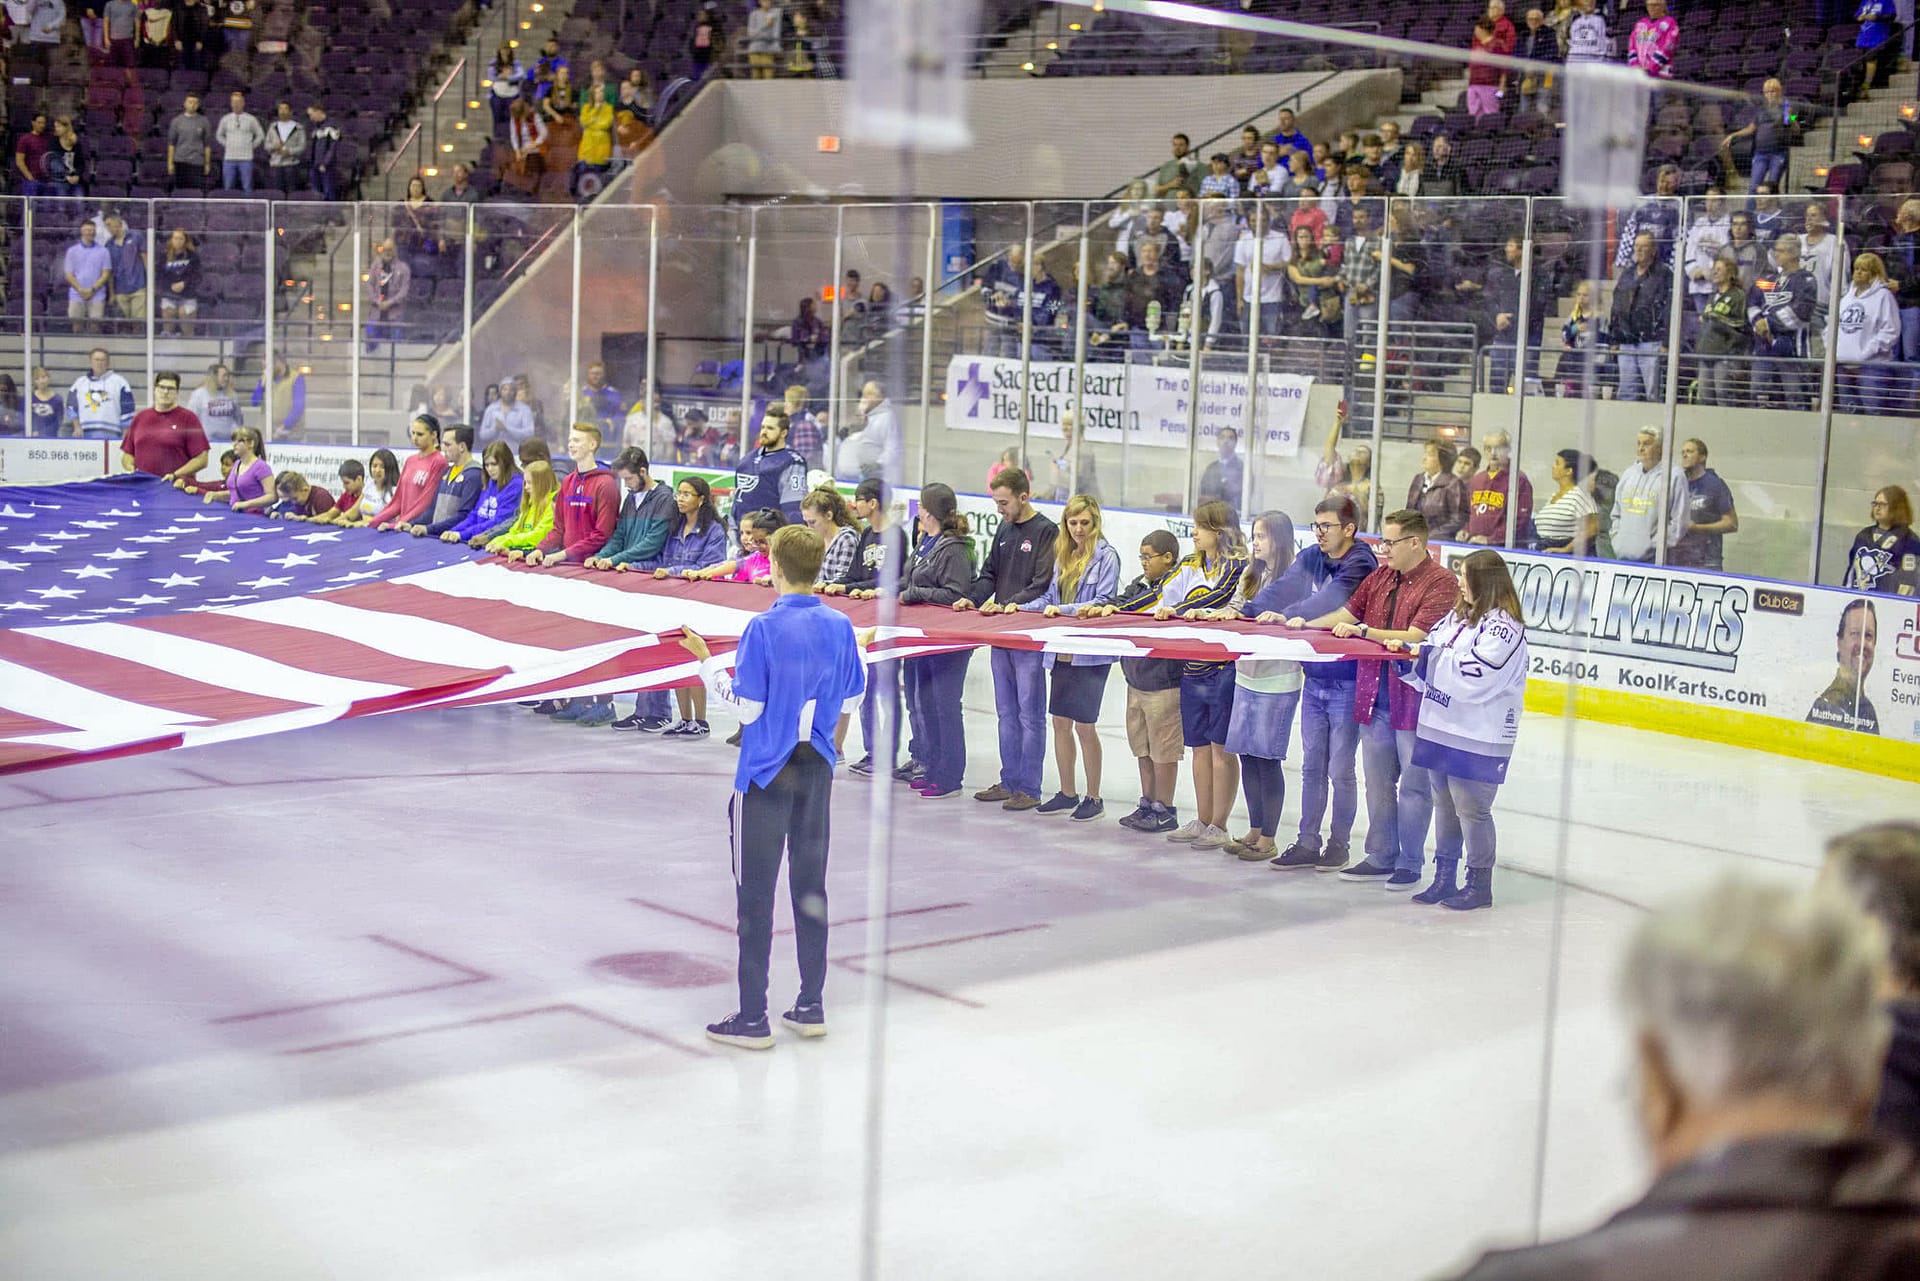 People holding the American flag over the ice. 